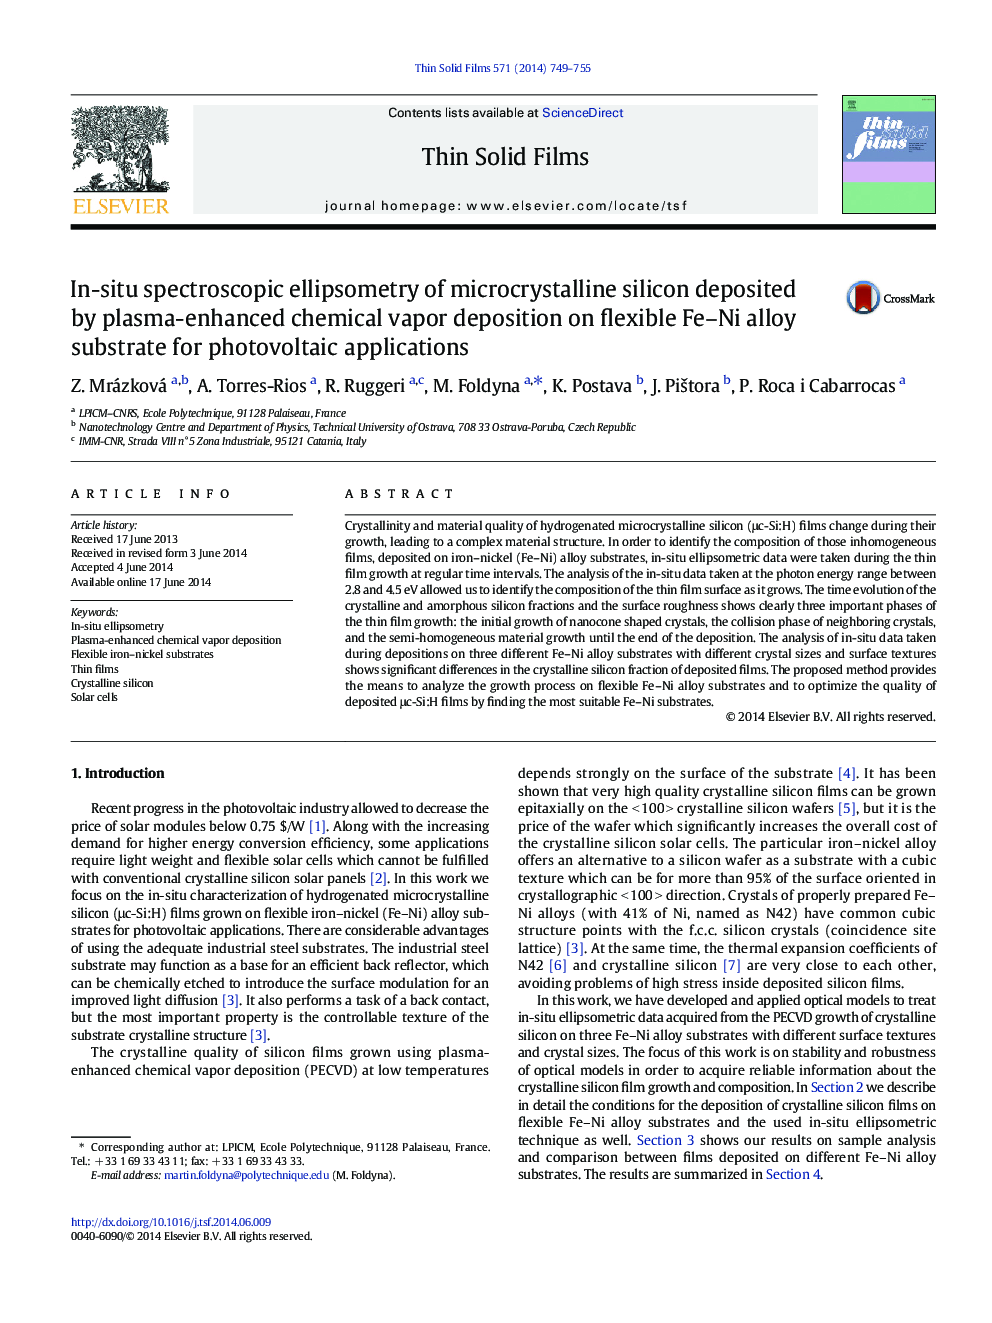 In-situ spectroscopic ellipsometry of microcrystalline silicon deposited by plasma-enhanced chemical vapor deposition on flexible Fe-Ni alloy substrate for photovoltaic applications